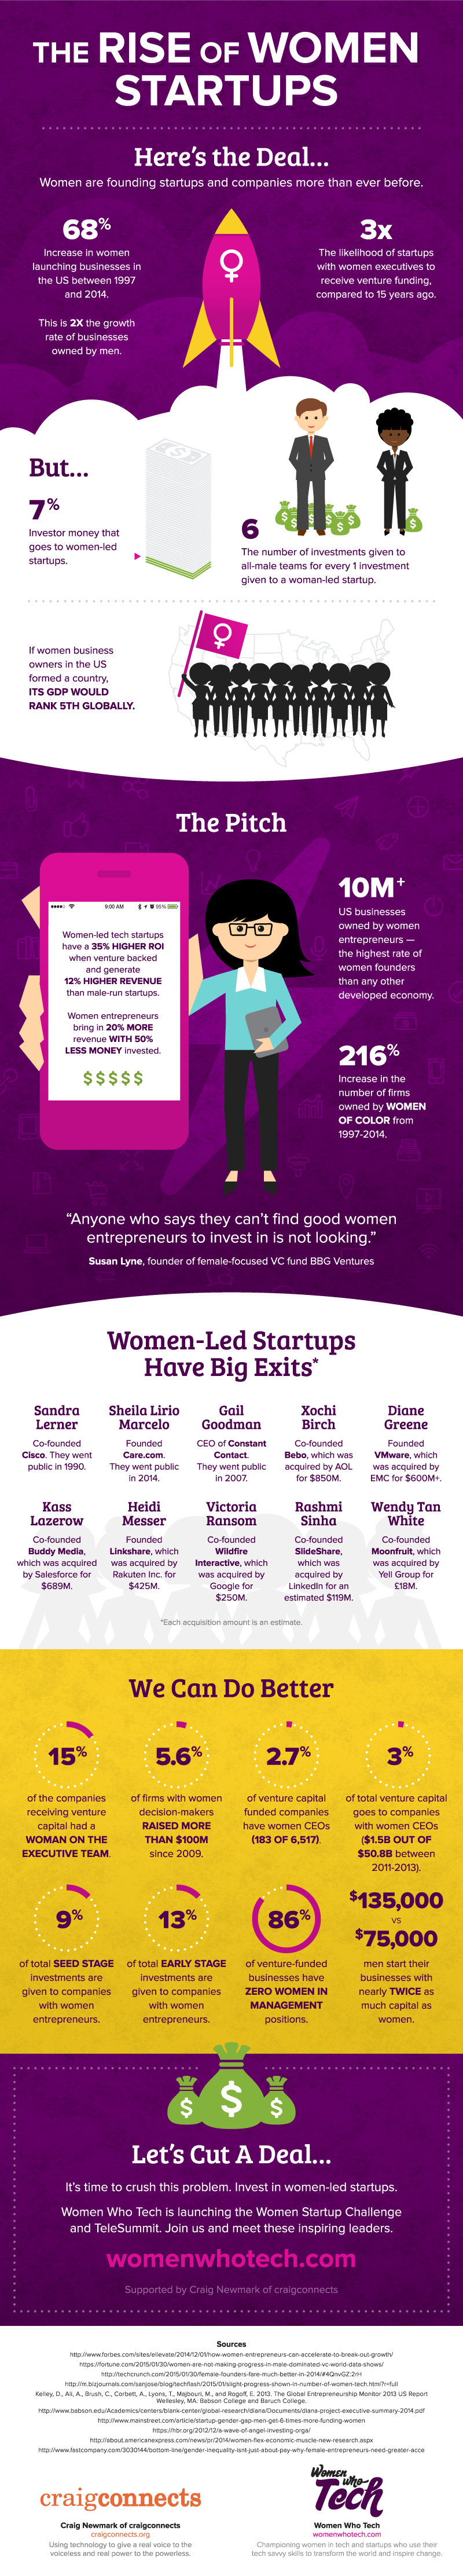 the-rise-of-women-startups